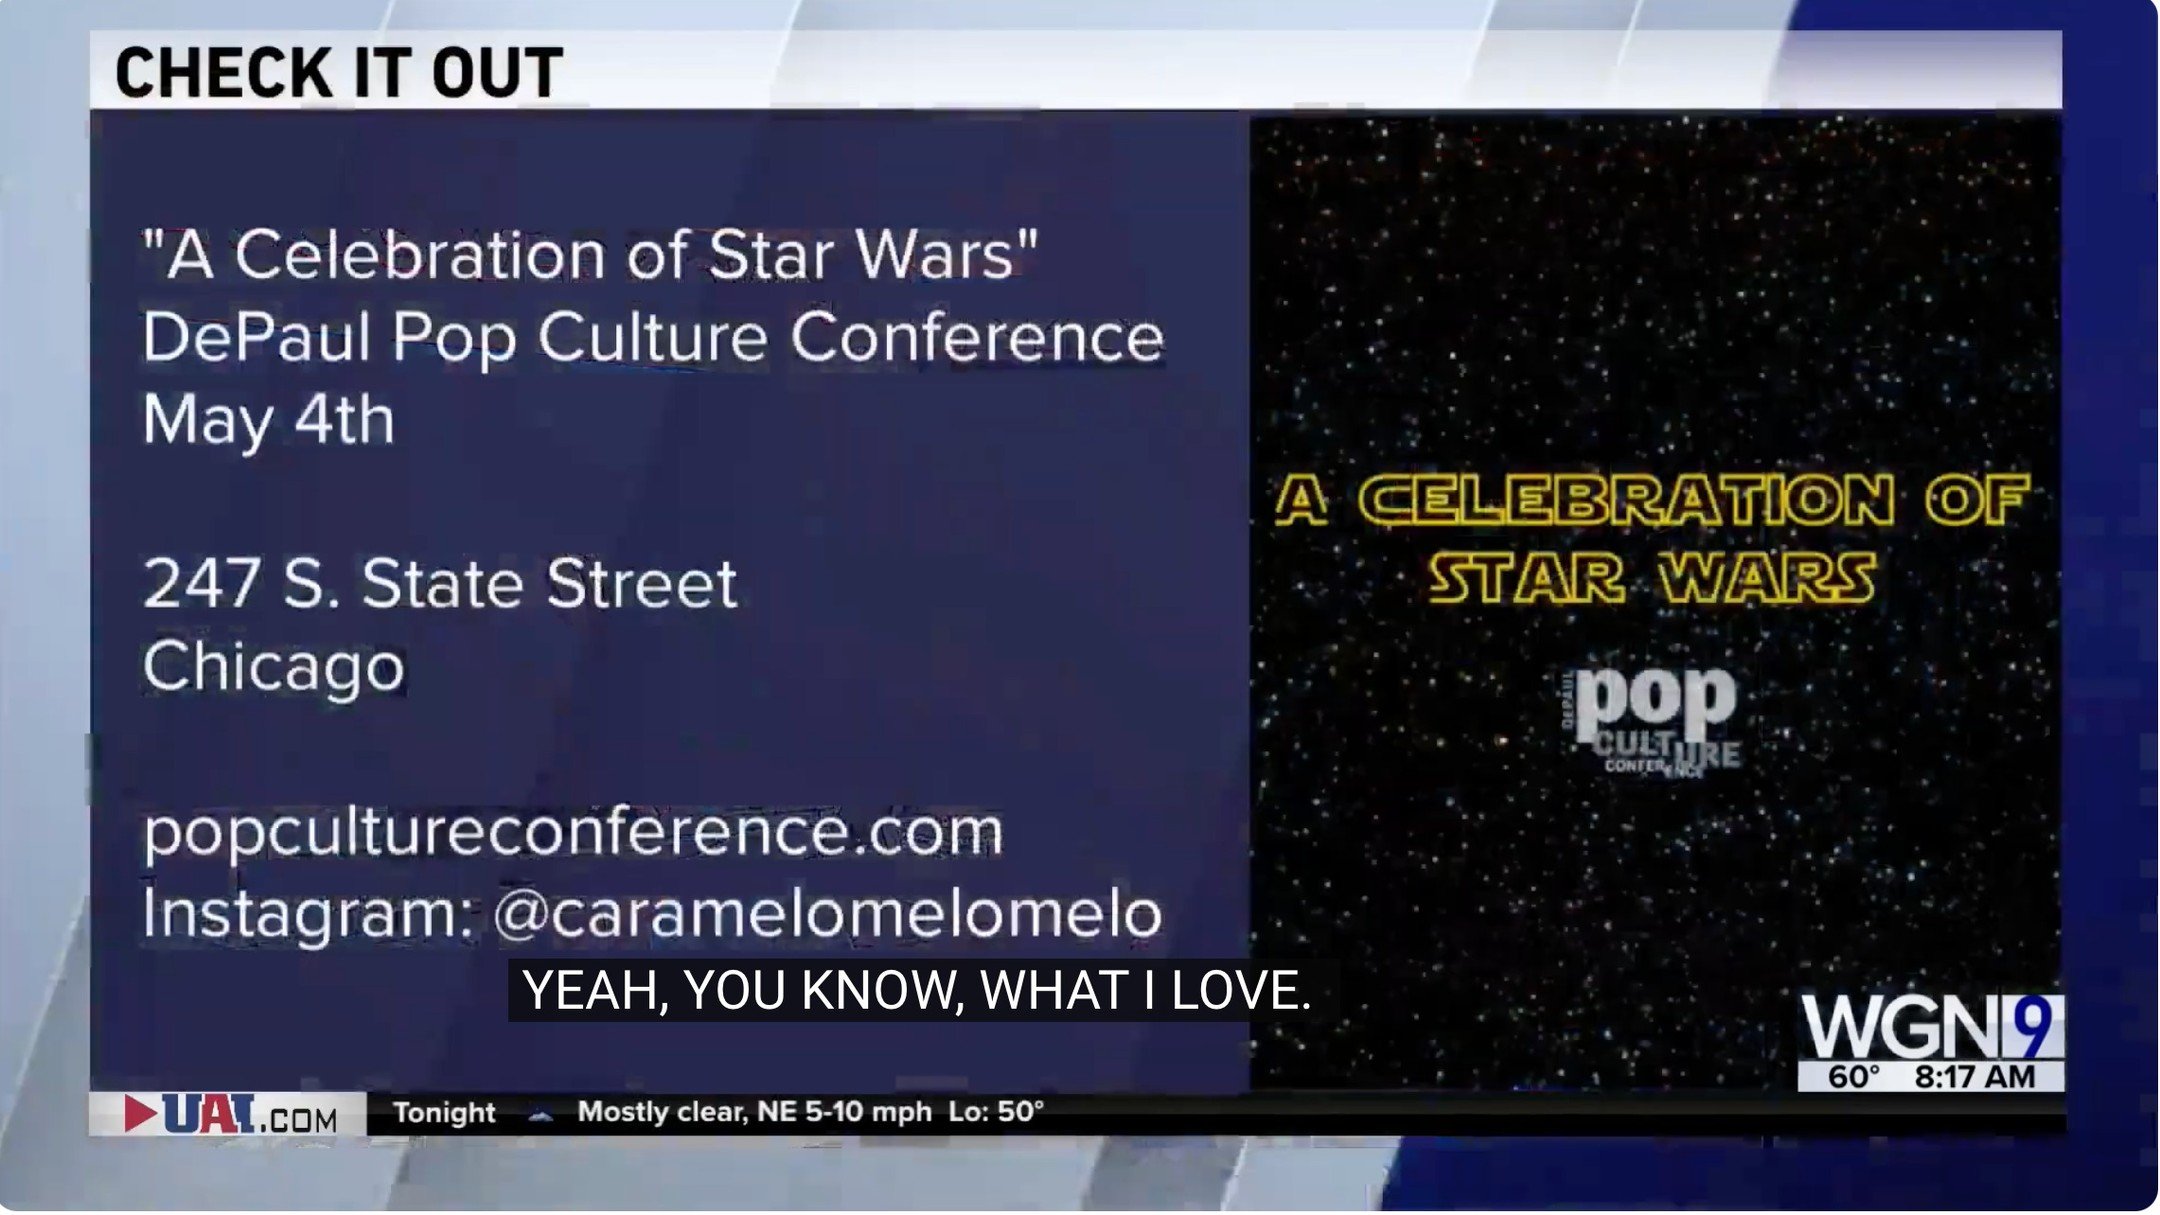 Fantastic to hear our Academic Keynote @carmelo_melomelo on @WGNNews this morning! Thanks for the shout-out! :) Free registration at popcultureconference.com! https://www.youtube.com/watch?v=zMTKGckxBKQ